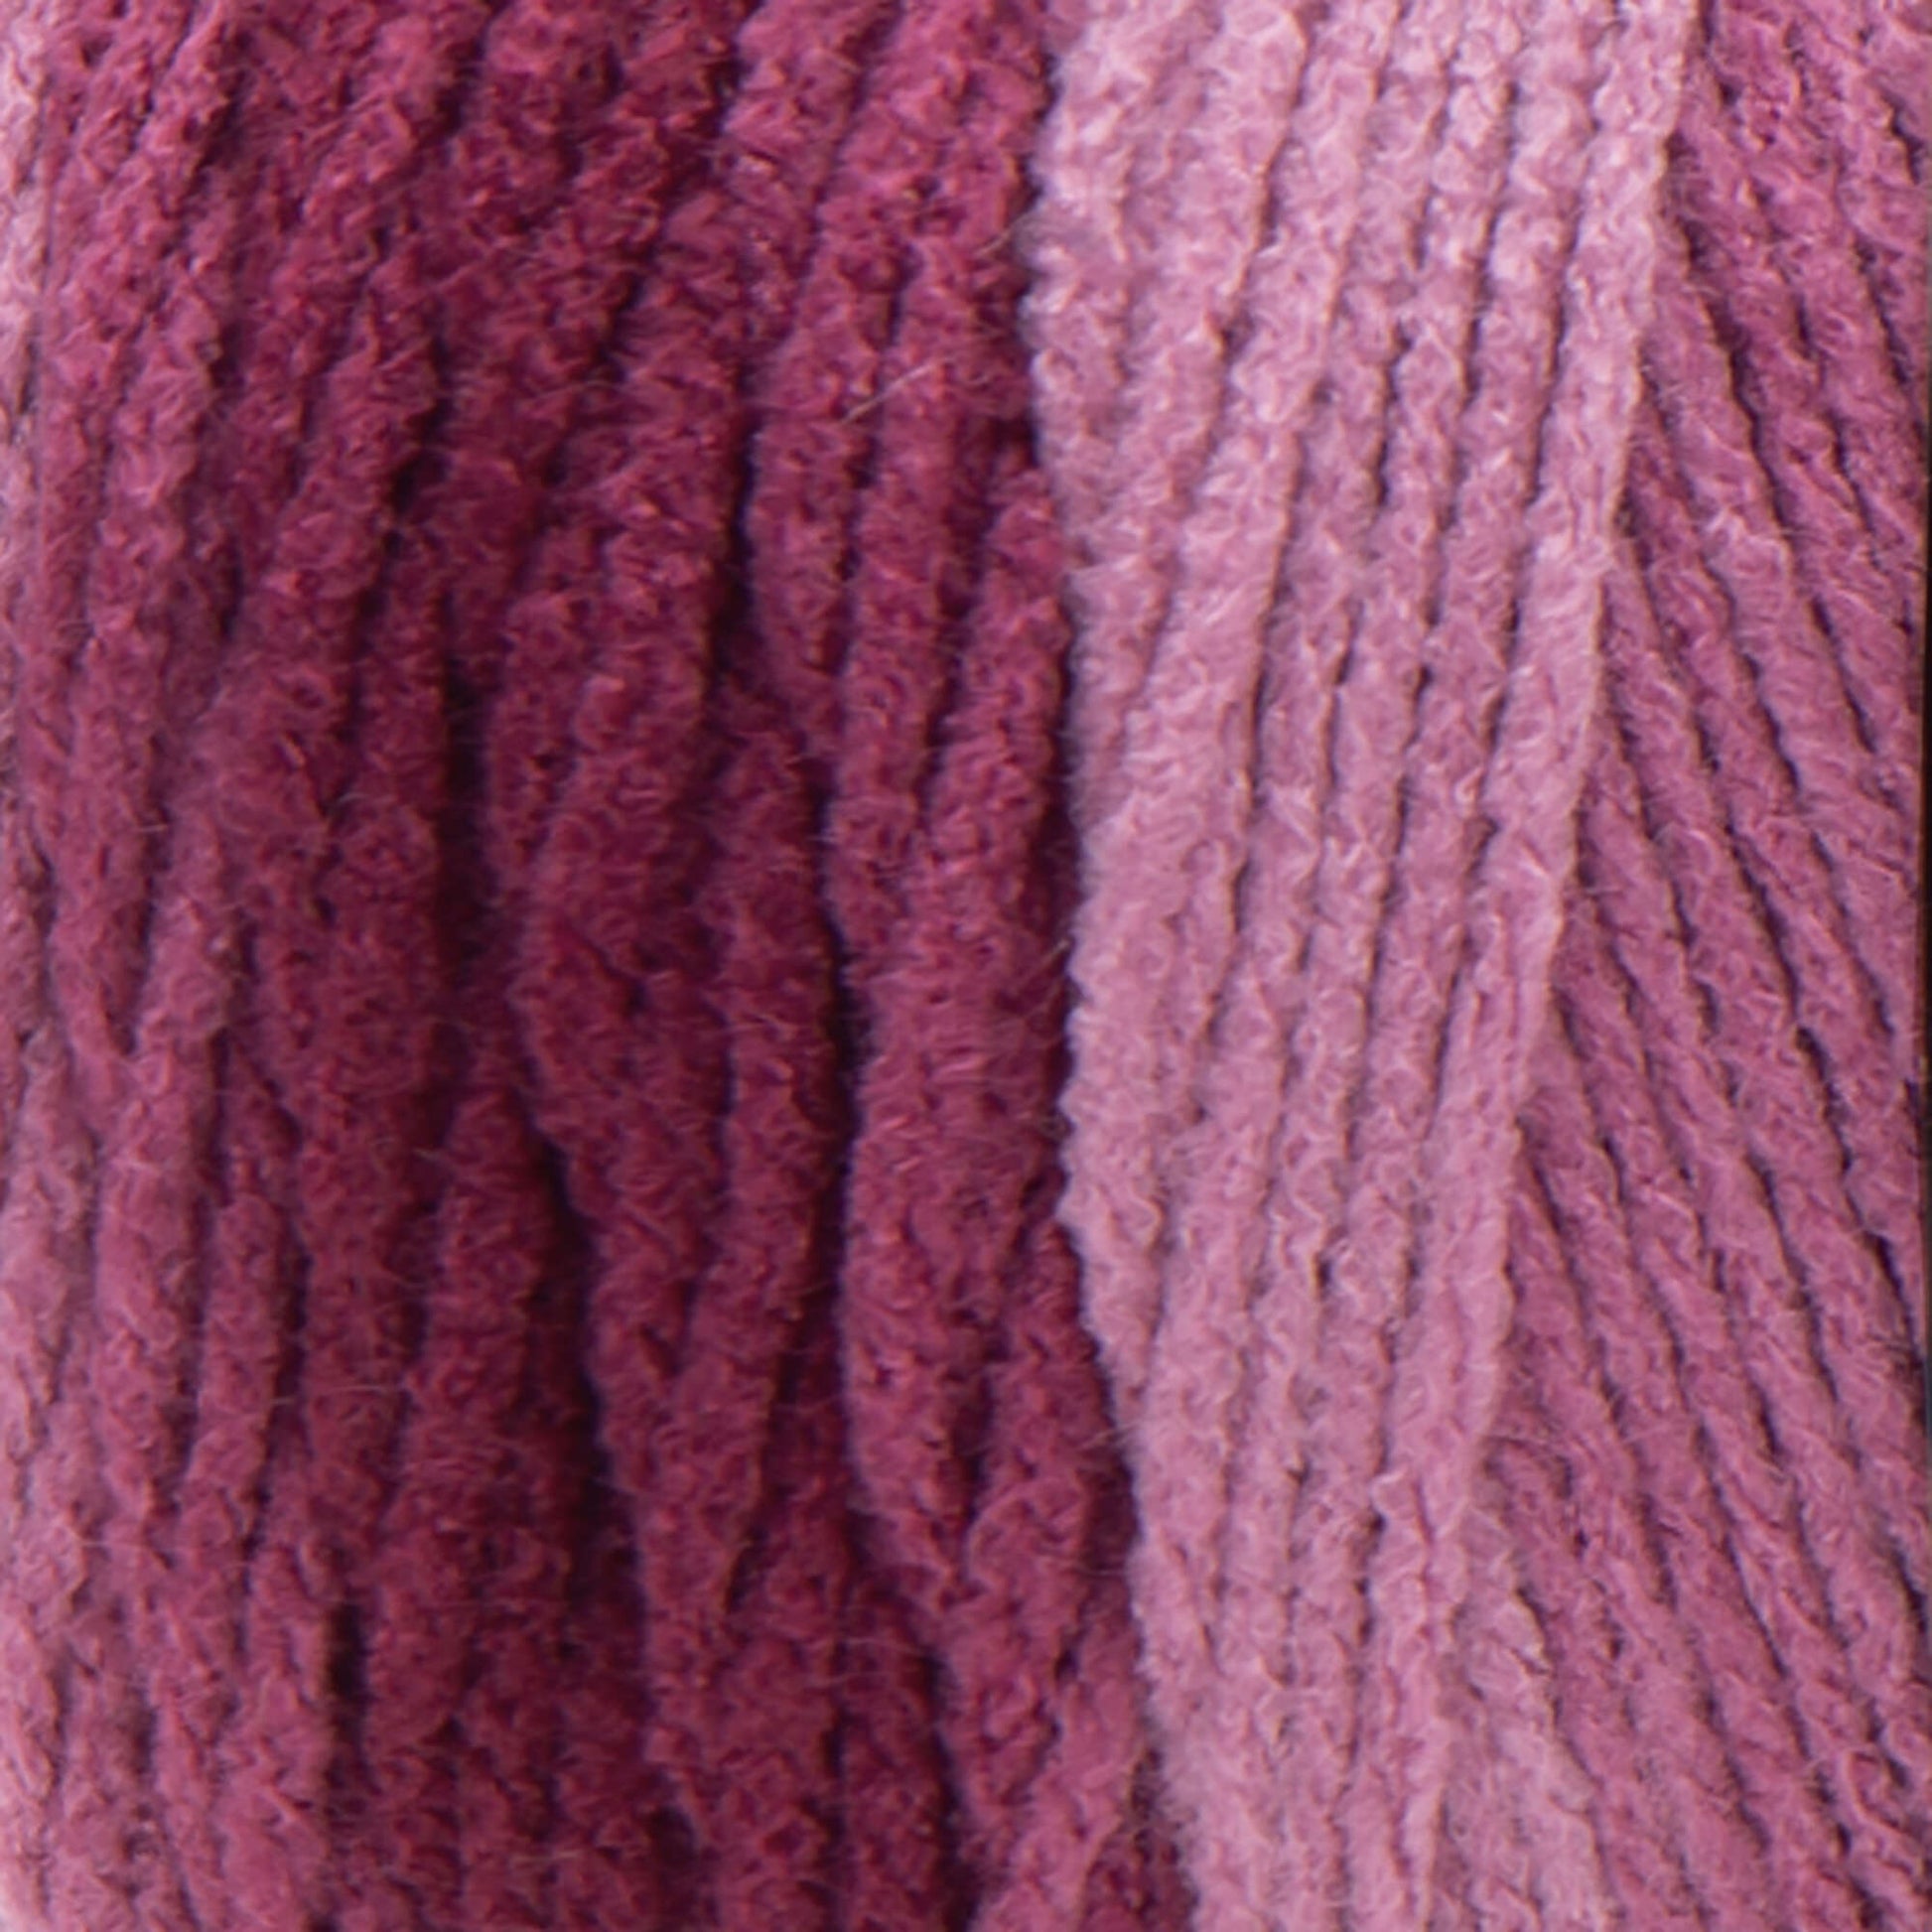 Red Heart Super Saver Ombre Yarn Anemone